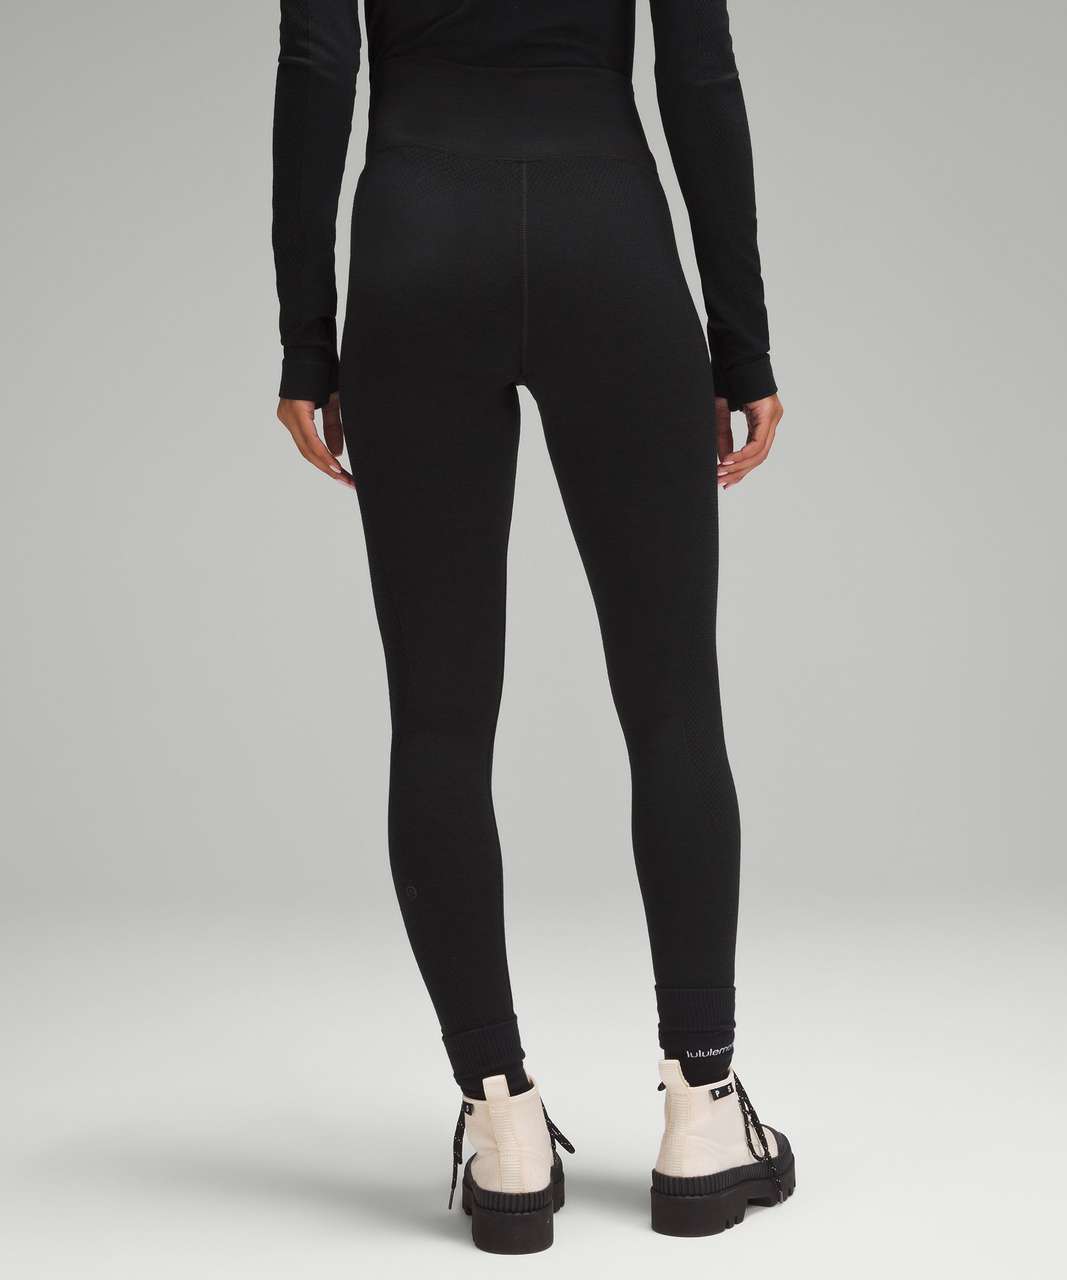 Lululemon Base Pace High-Rise Tight 25 Two-Tone Ribbed - Retail $118